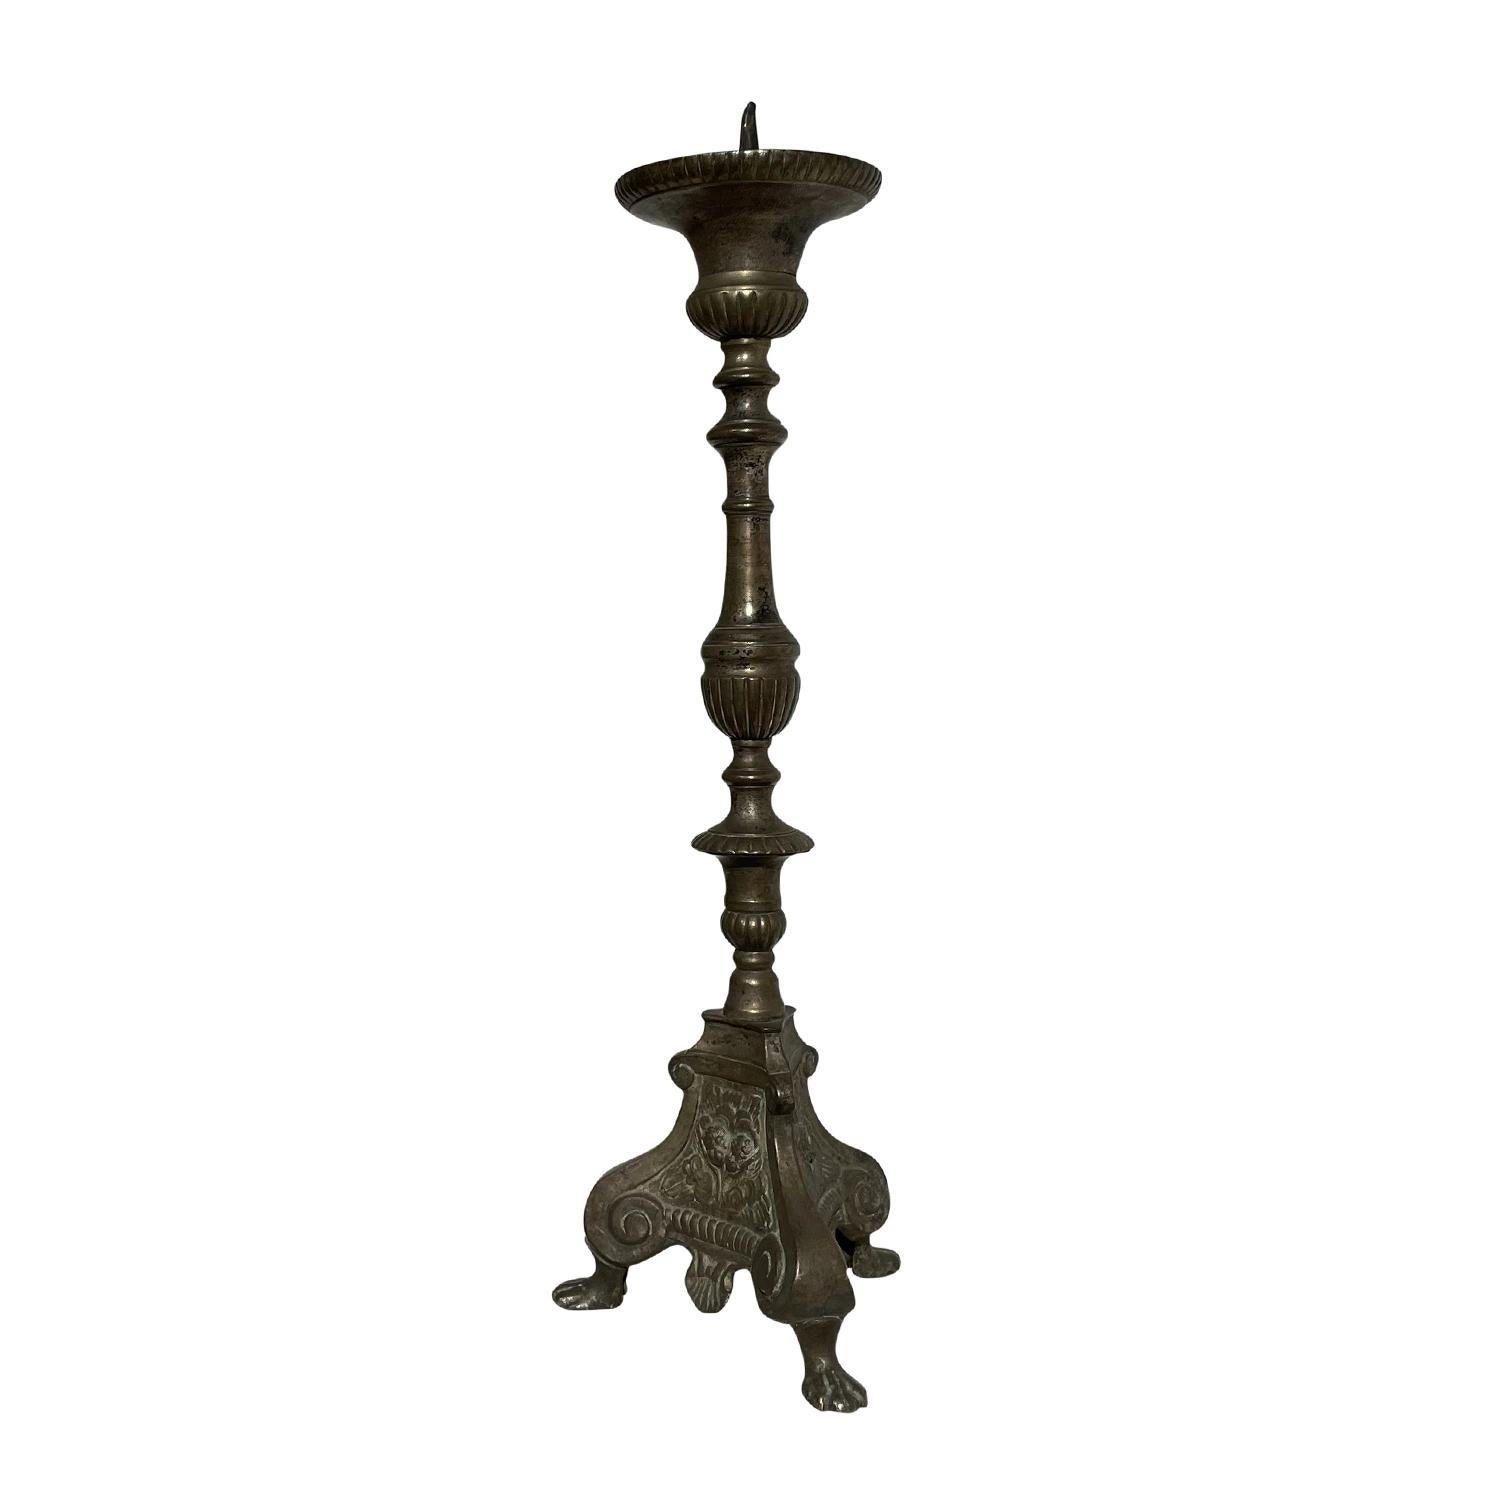 Hand-Crafted 18th Century Italian Bronze Altar Candle Holder - Antique Single Stick For Sale